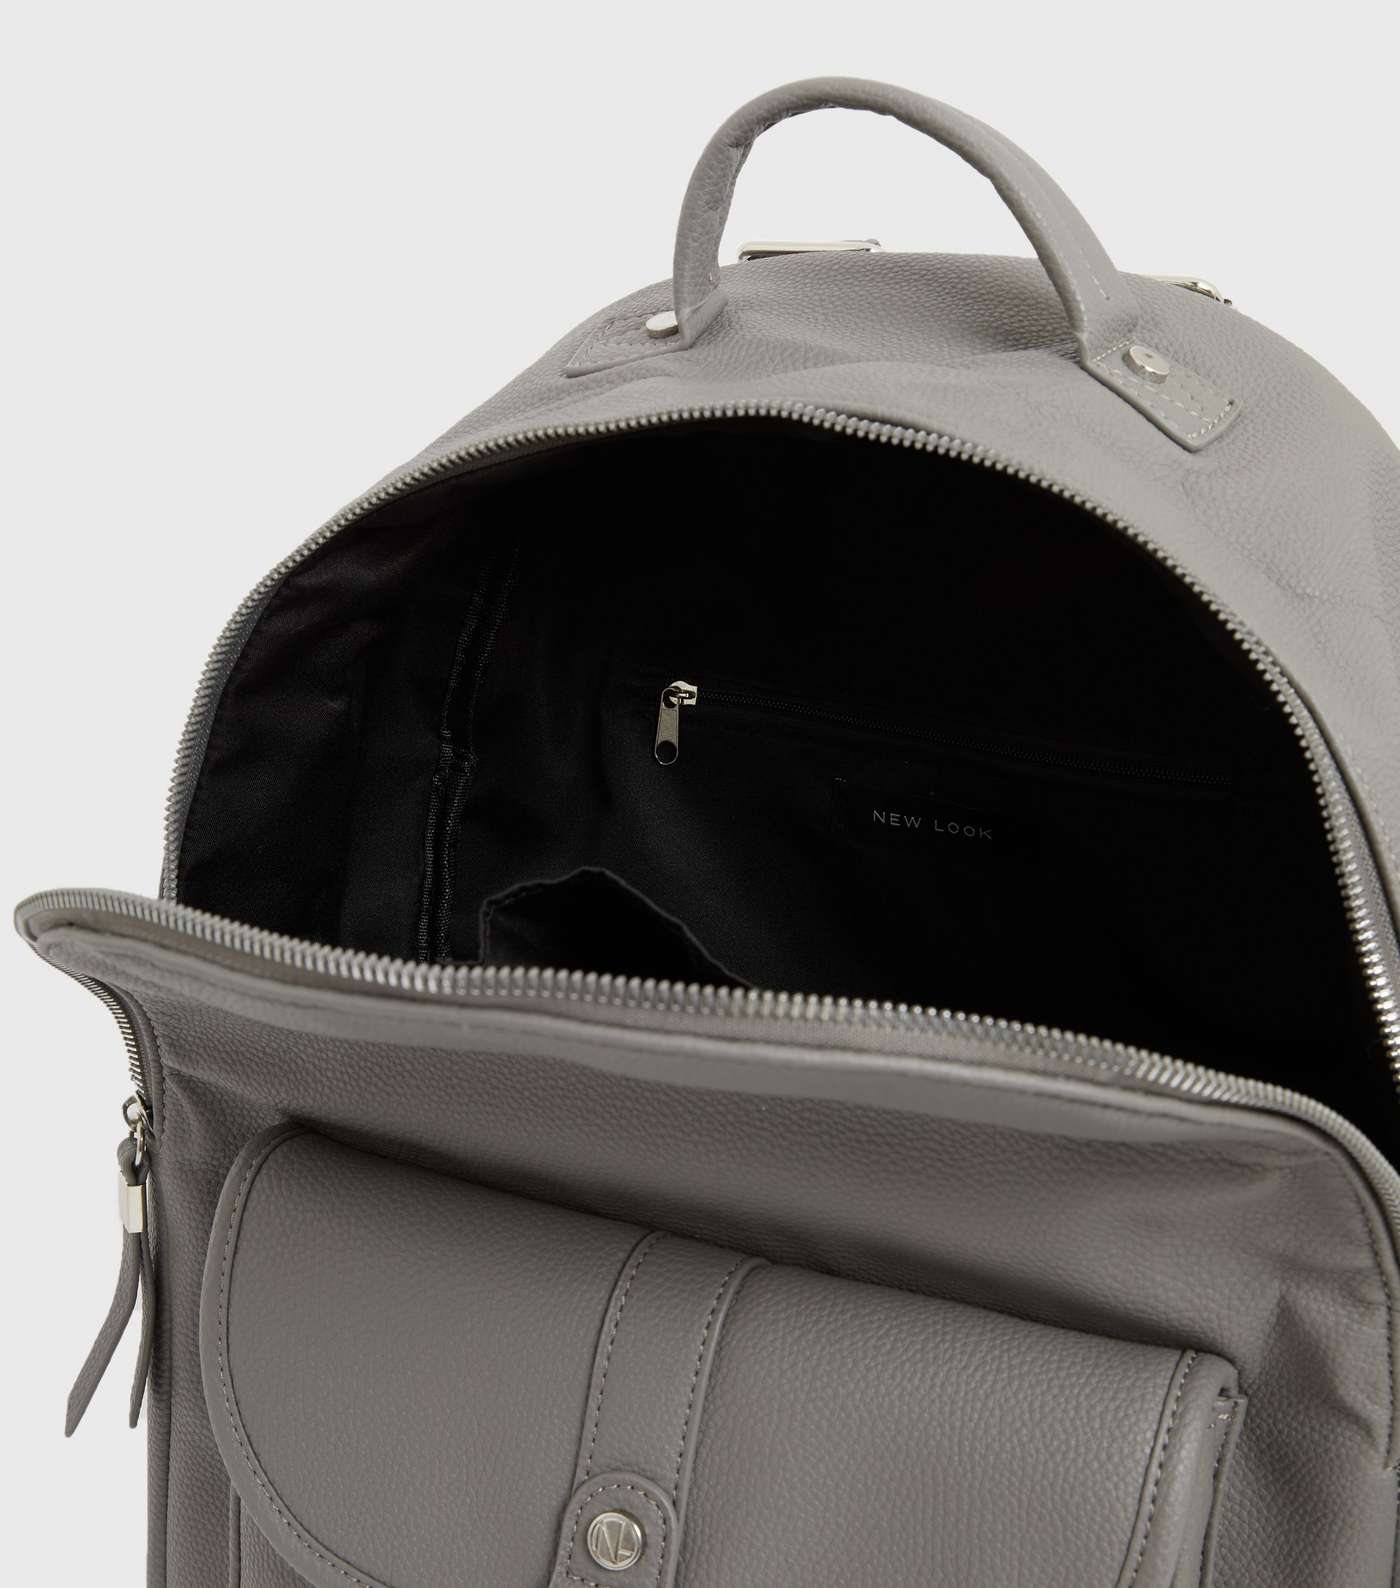 Grey Leather-Look Ring Front Backpack Image 4